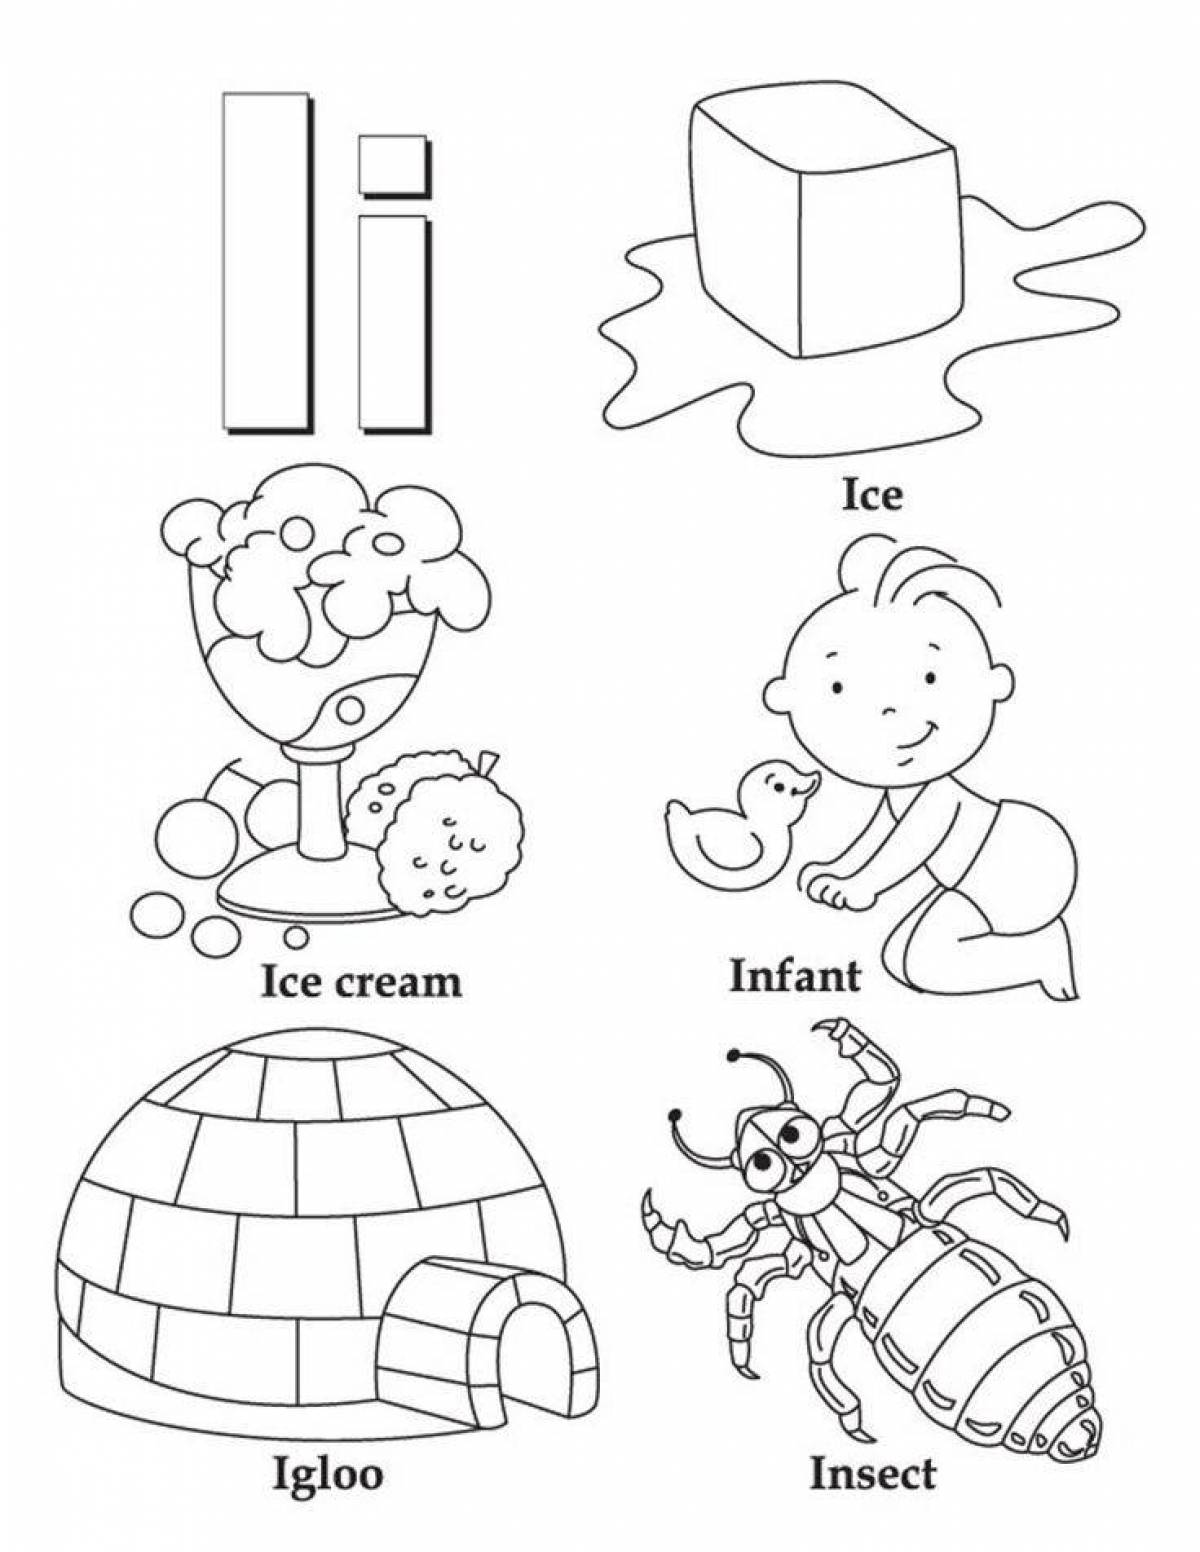 An entertaining coloring book of the English alphabet for children